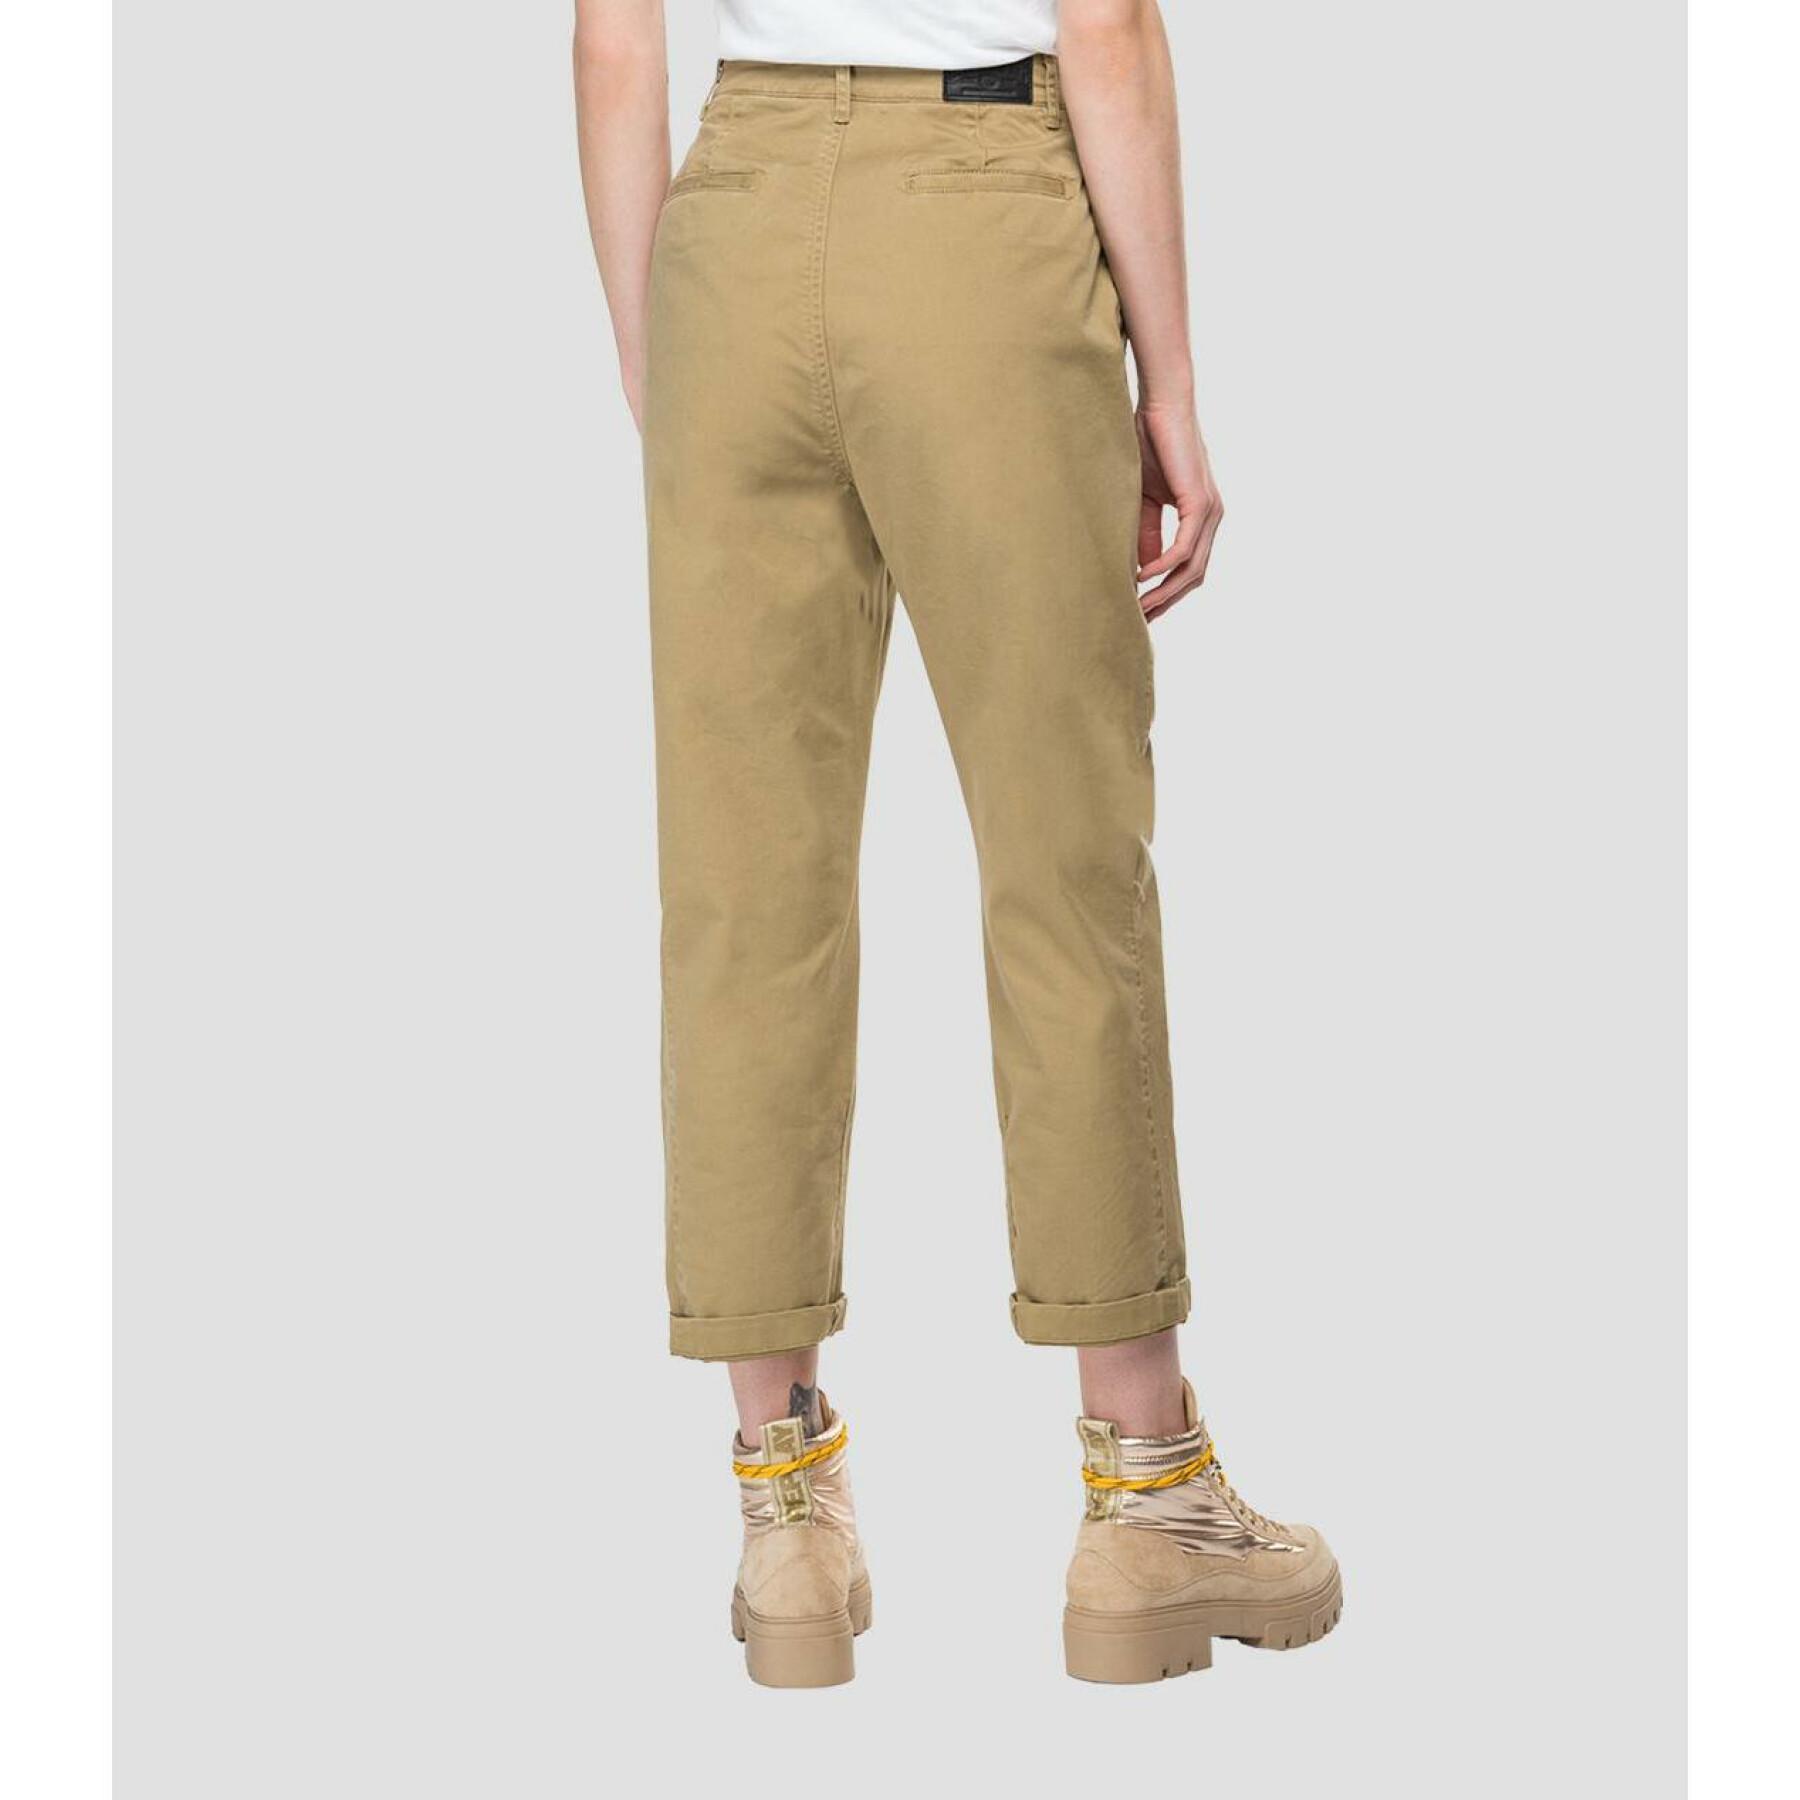 Women's high waist tapered trousers with pockets Replay